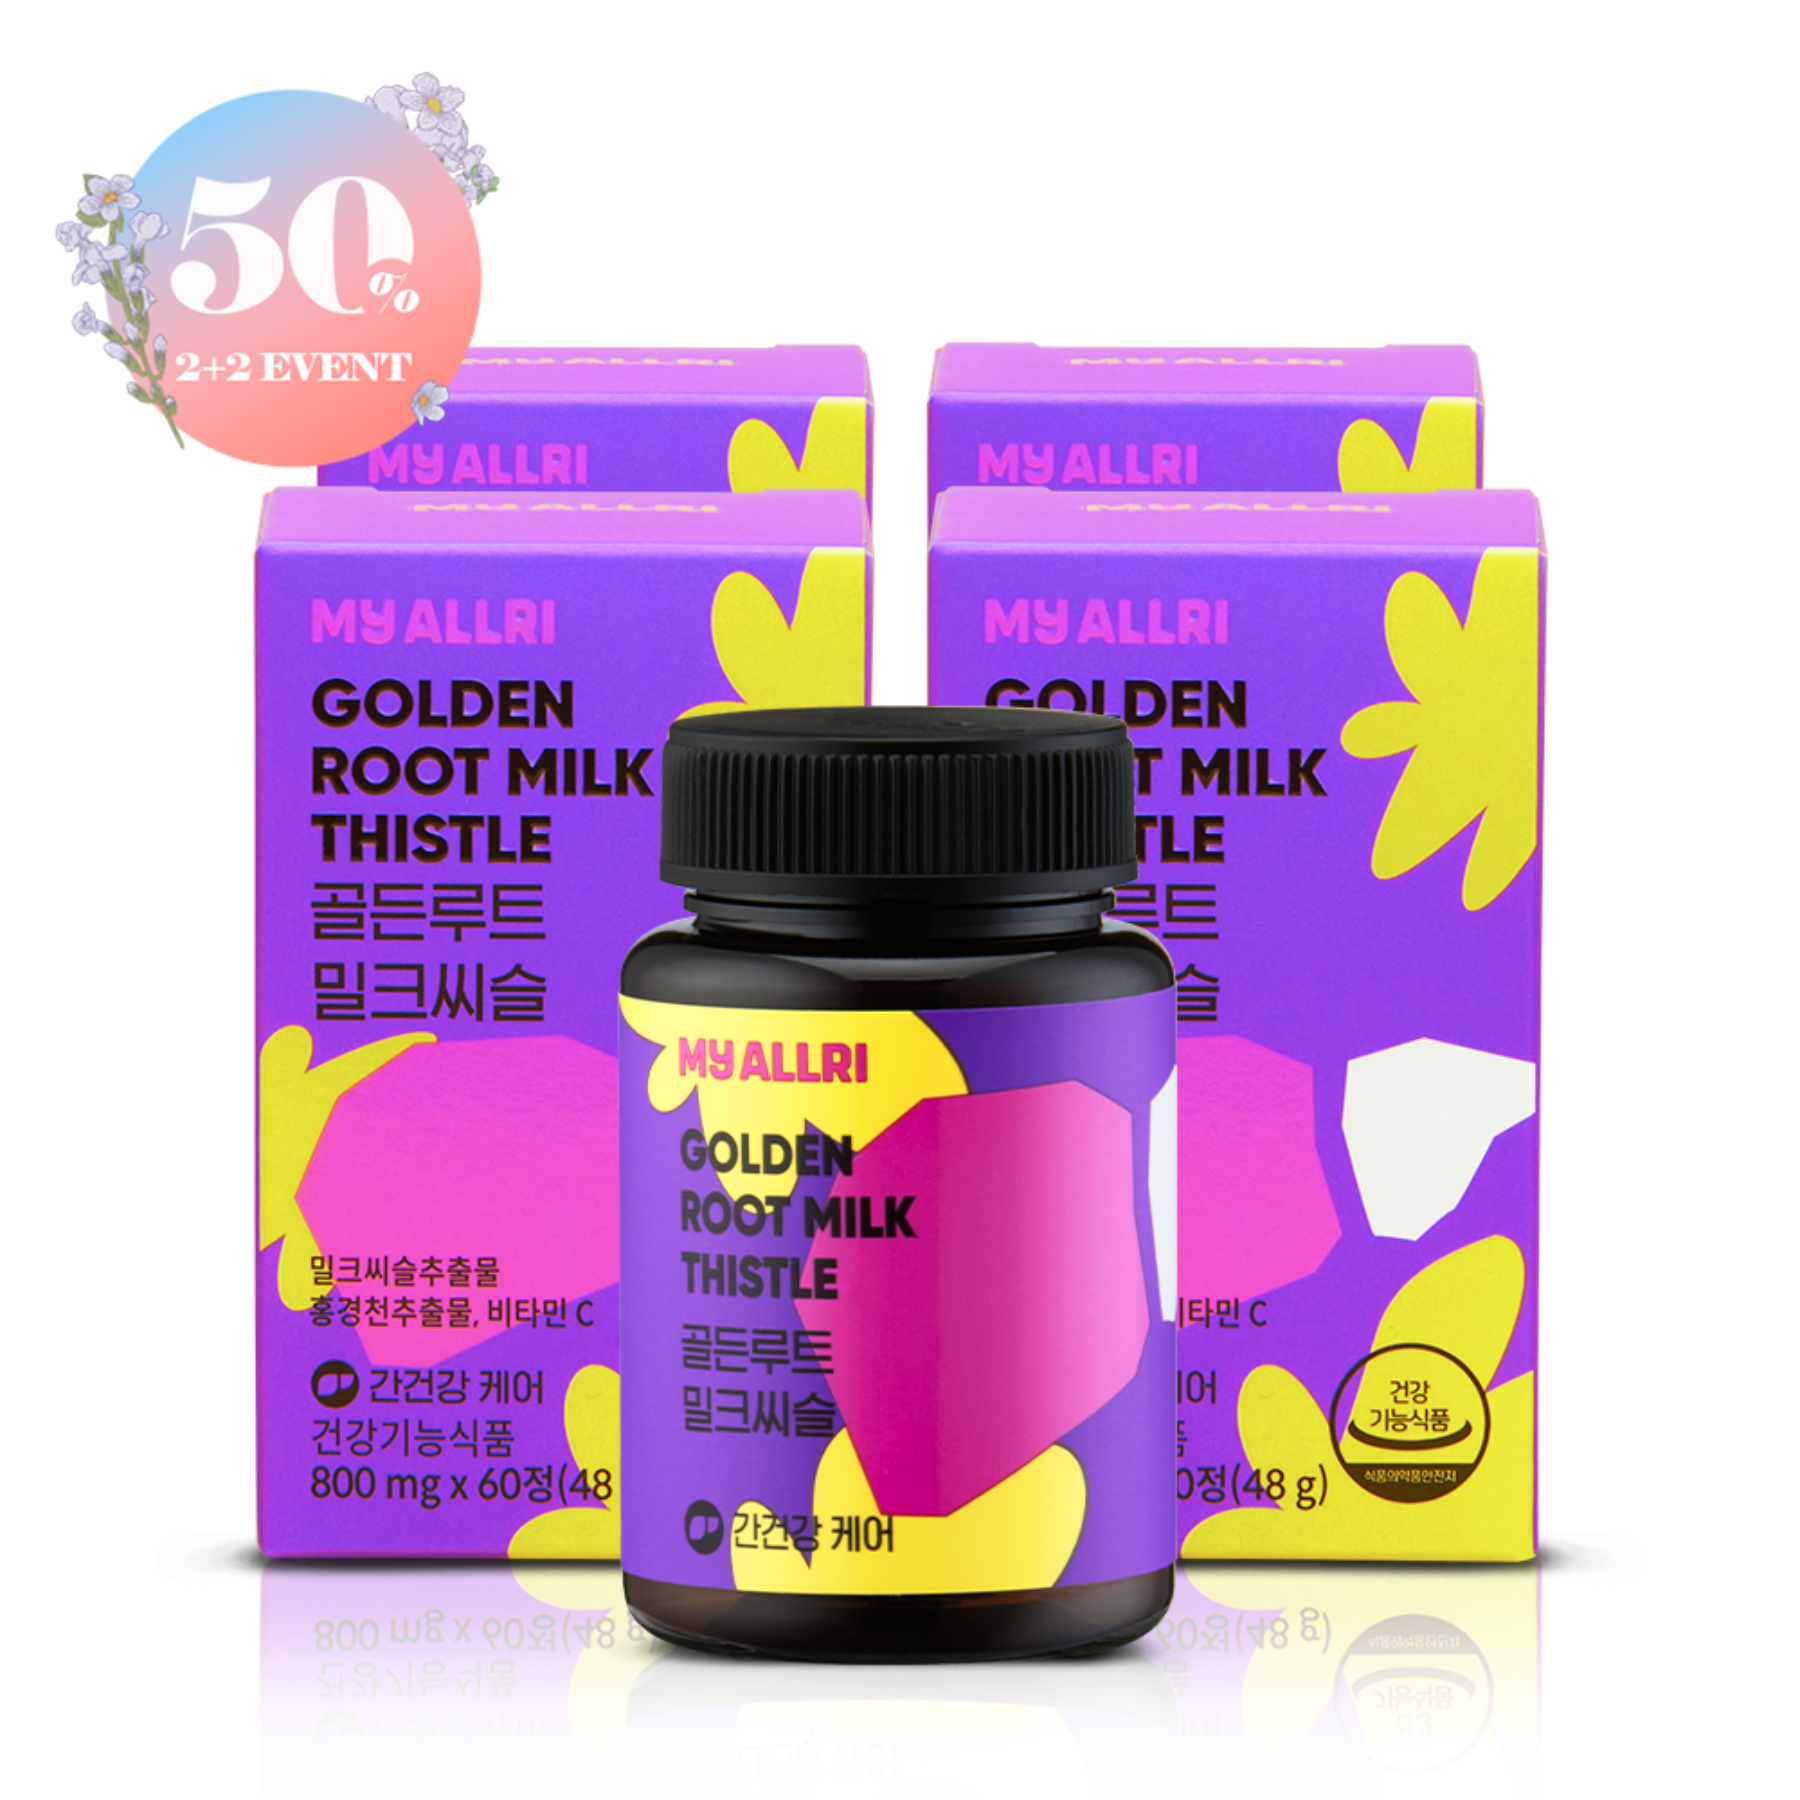 [2+2] Golden Root Milk Thistle 1ea, 2 months&#039; supply (total 8 months&#039; supply)